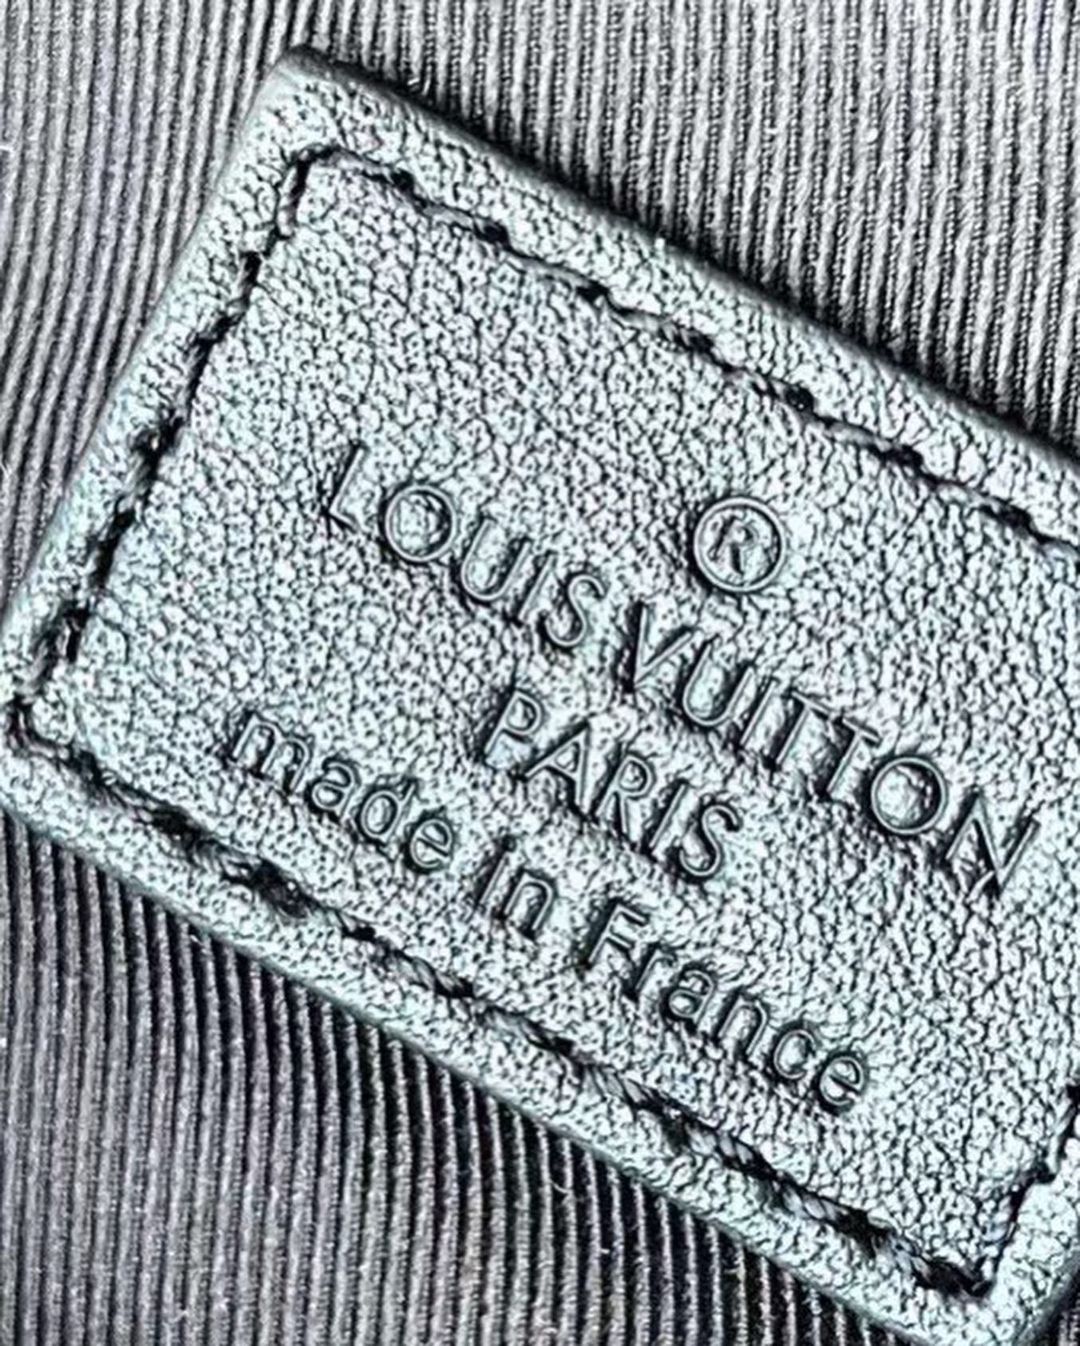 louis vuitton made in france tag